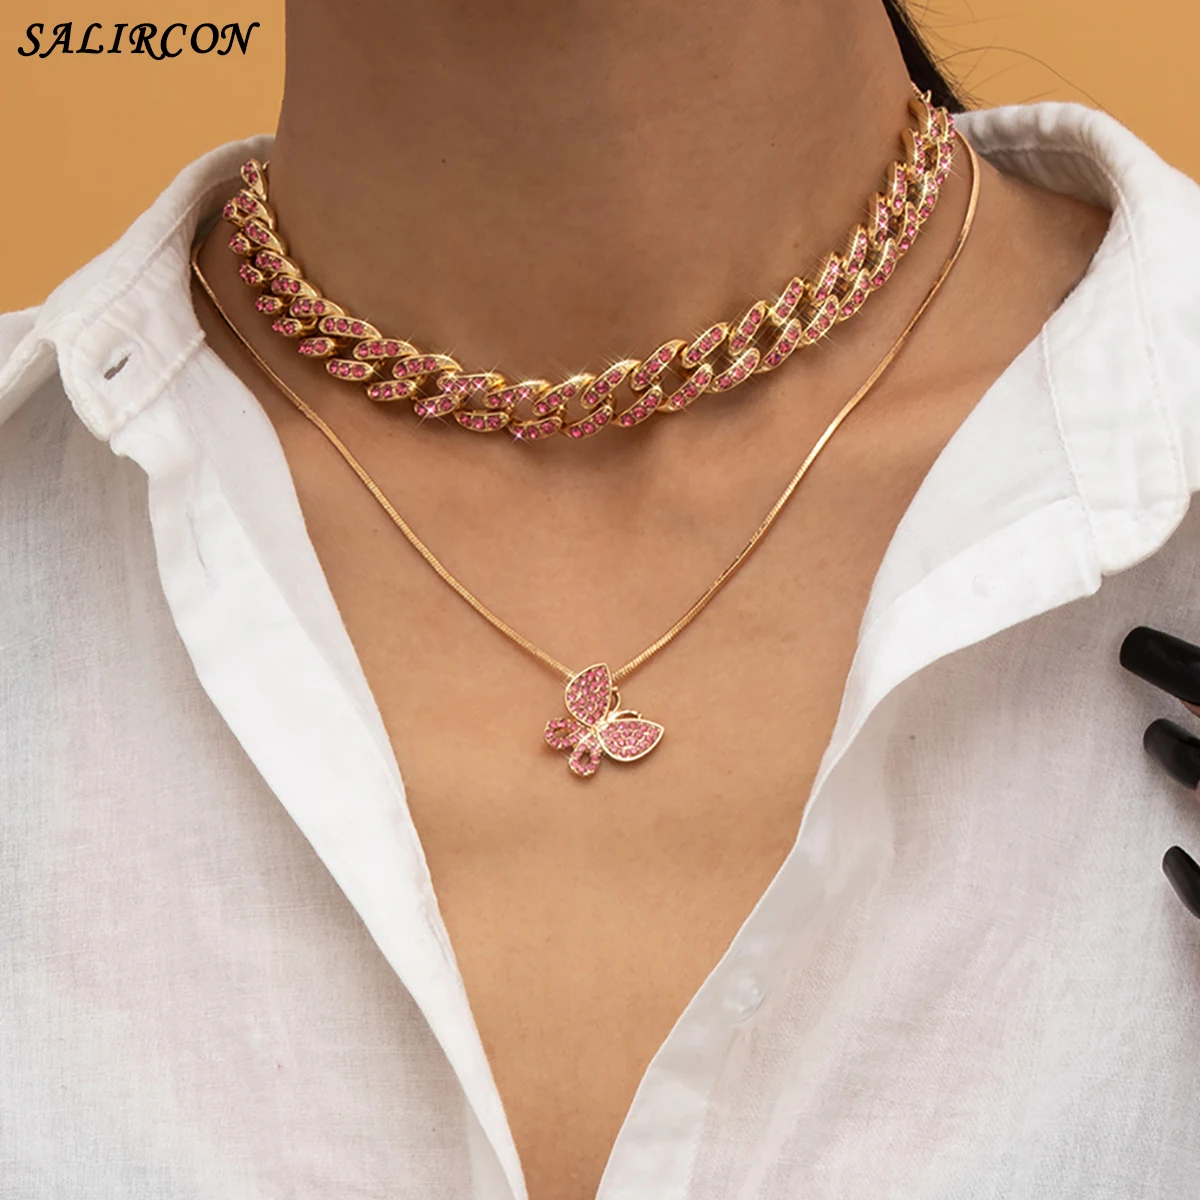 

Kpop Aesthetic Crystal Cuban Chain Butterfly Choker Necklace Punk Shiny Rhinestone Neck Chains for Women Girls Jewelry Gift 2021